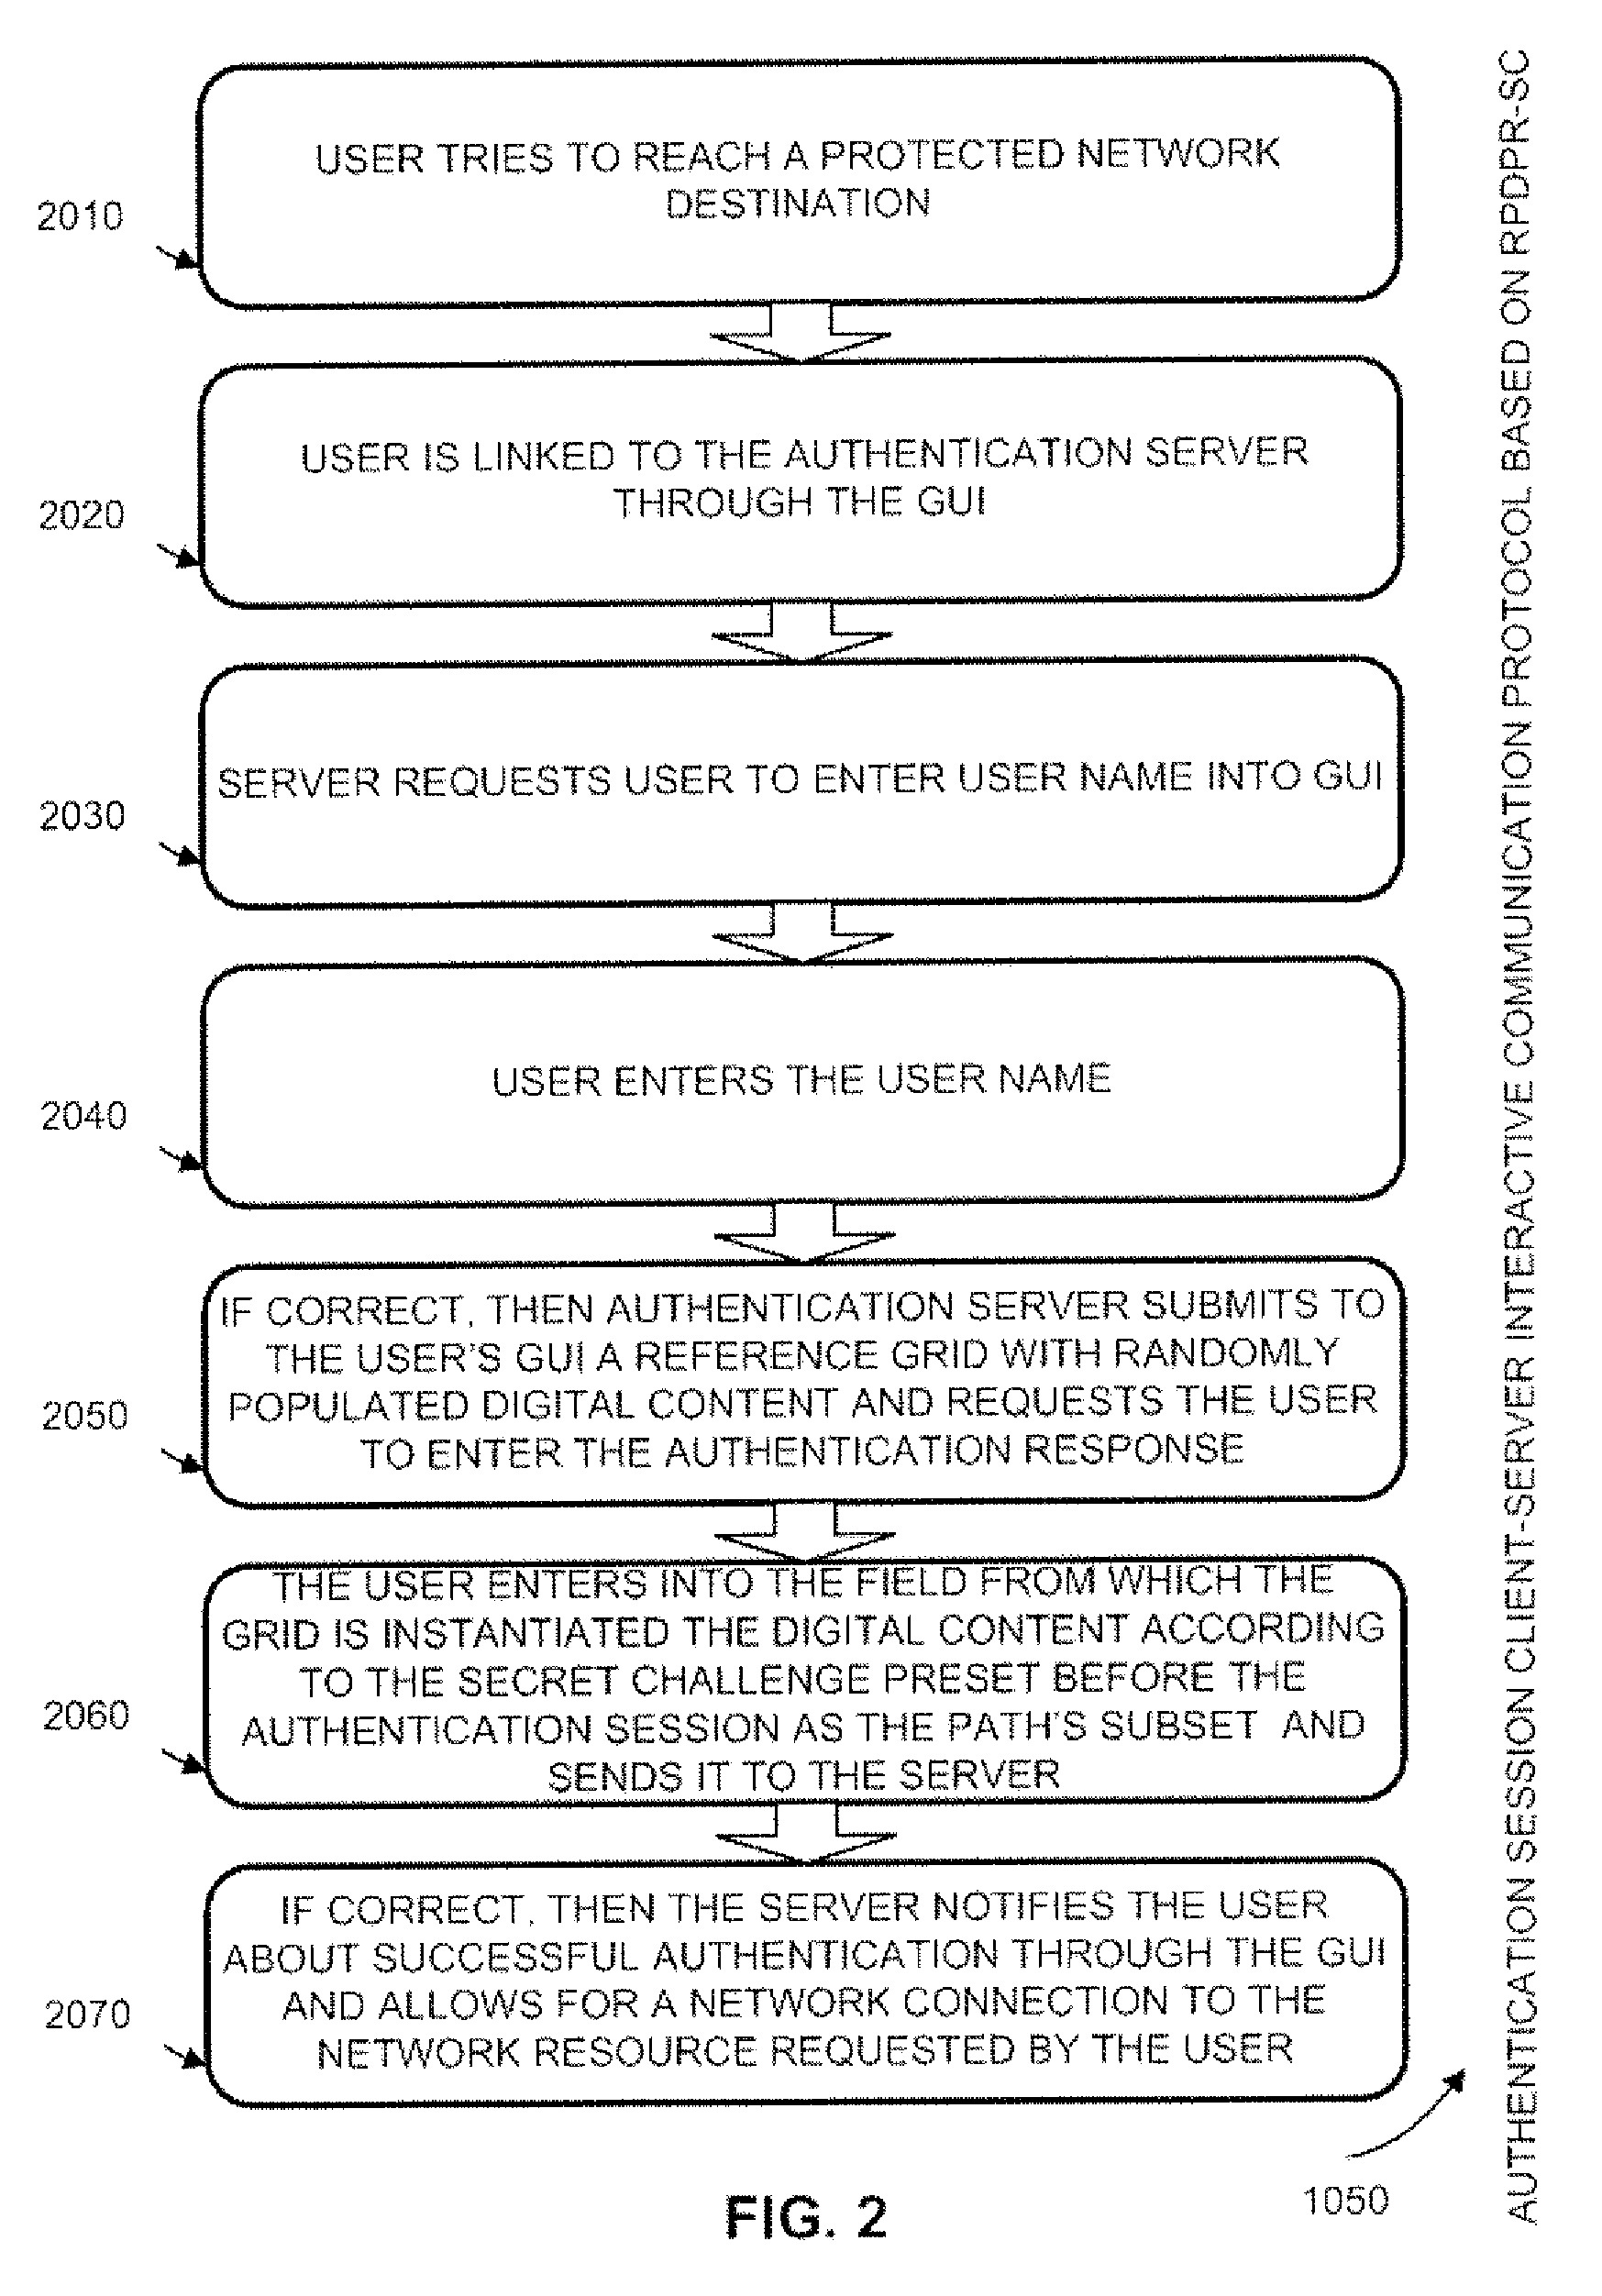 Authentication method of random partial digitized path recognition with a challenge built into the path